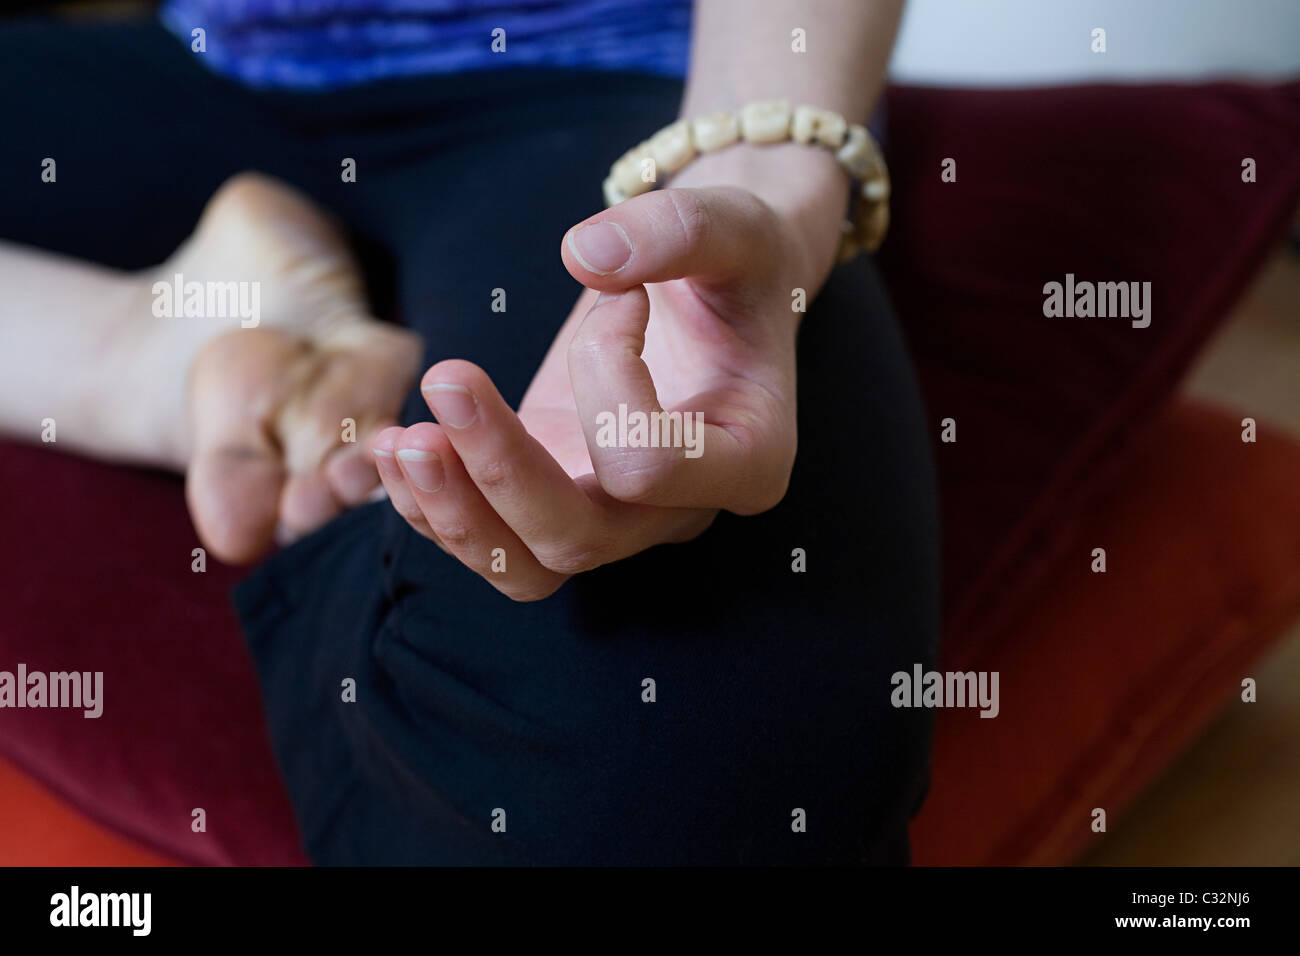 Women in lotus position during yoga Stock Photo